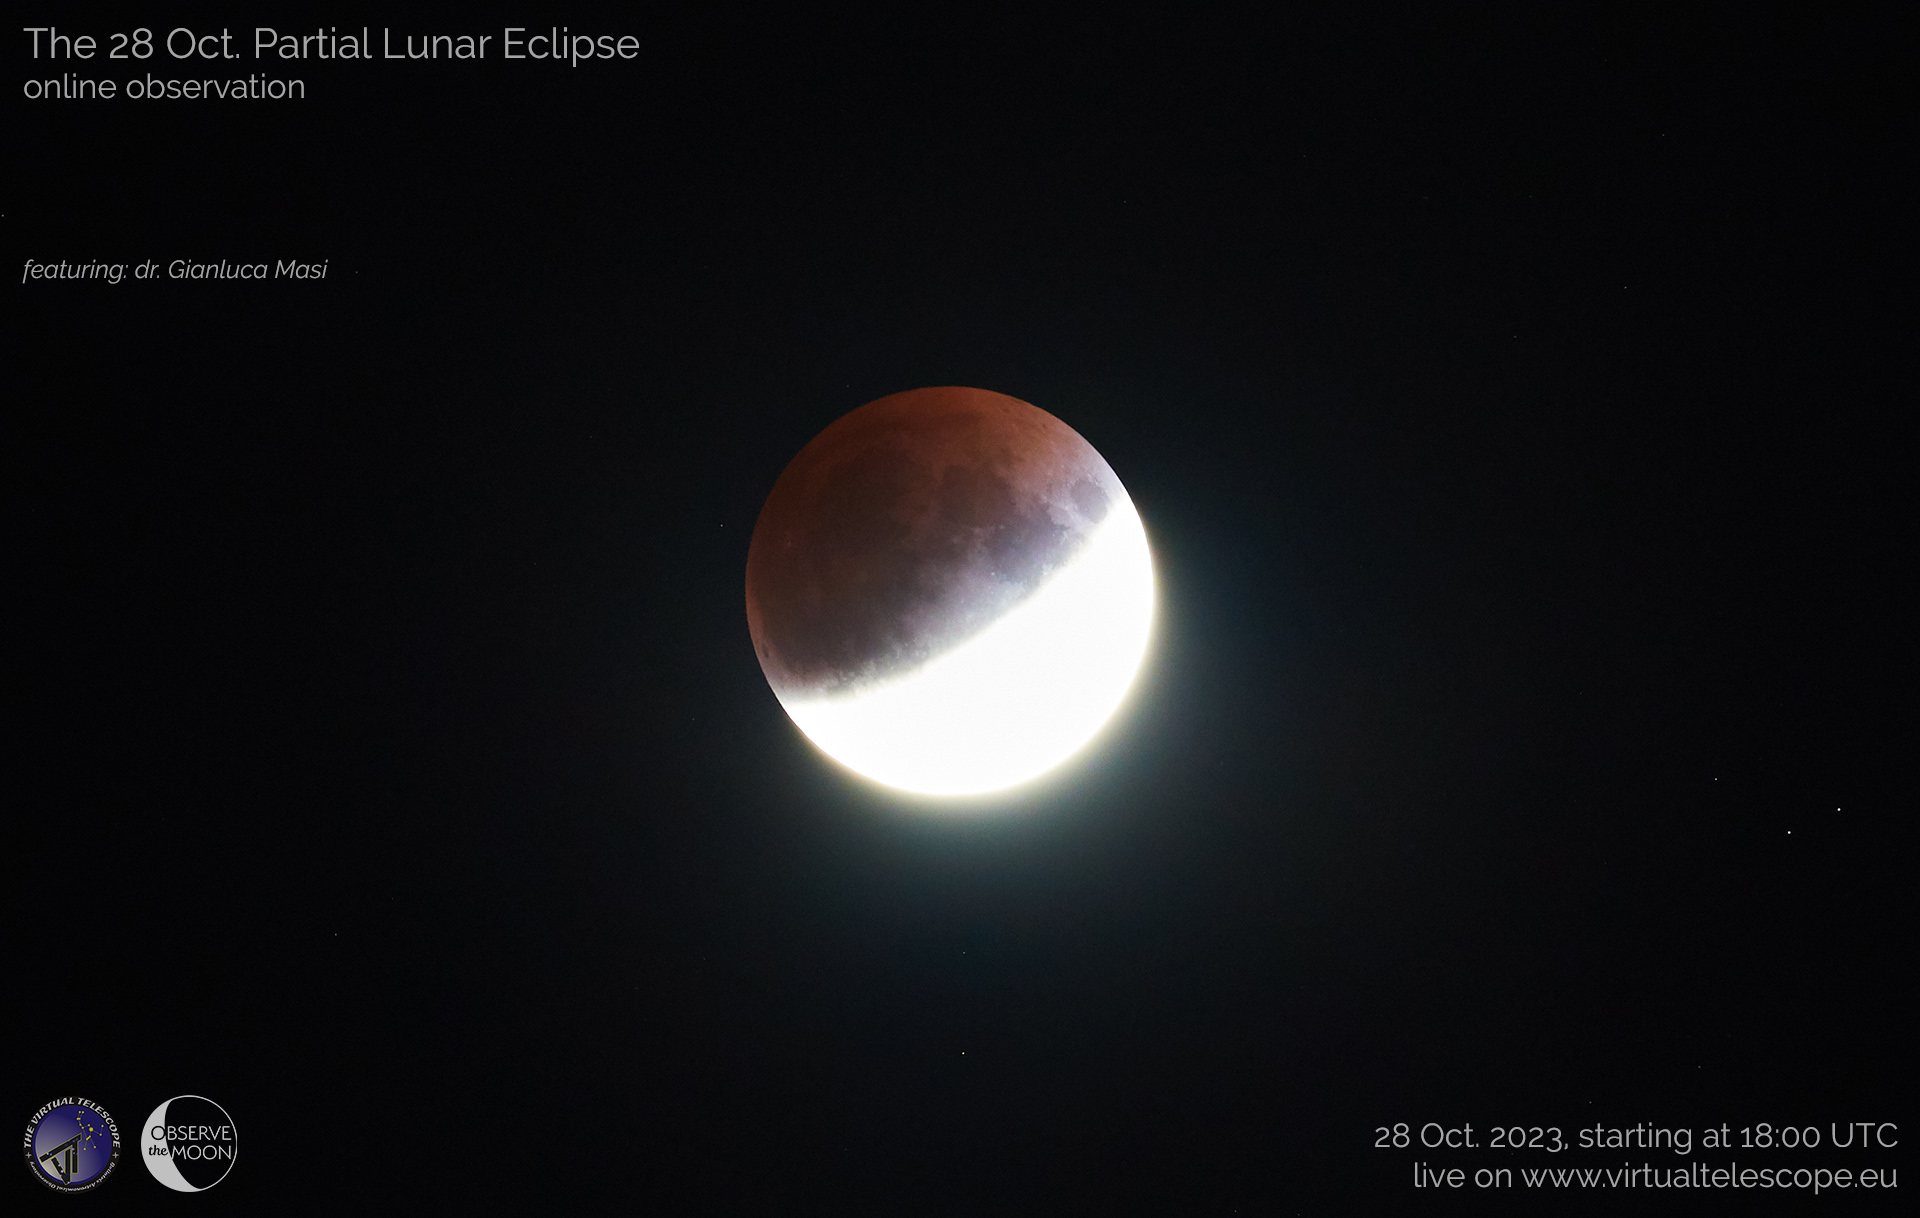 28 Oct. partial lunar eclipse: poster of the event.